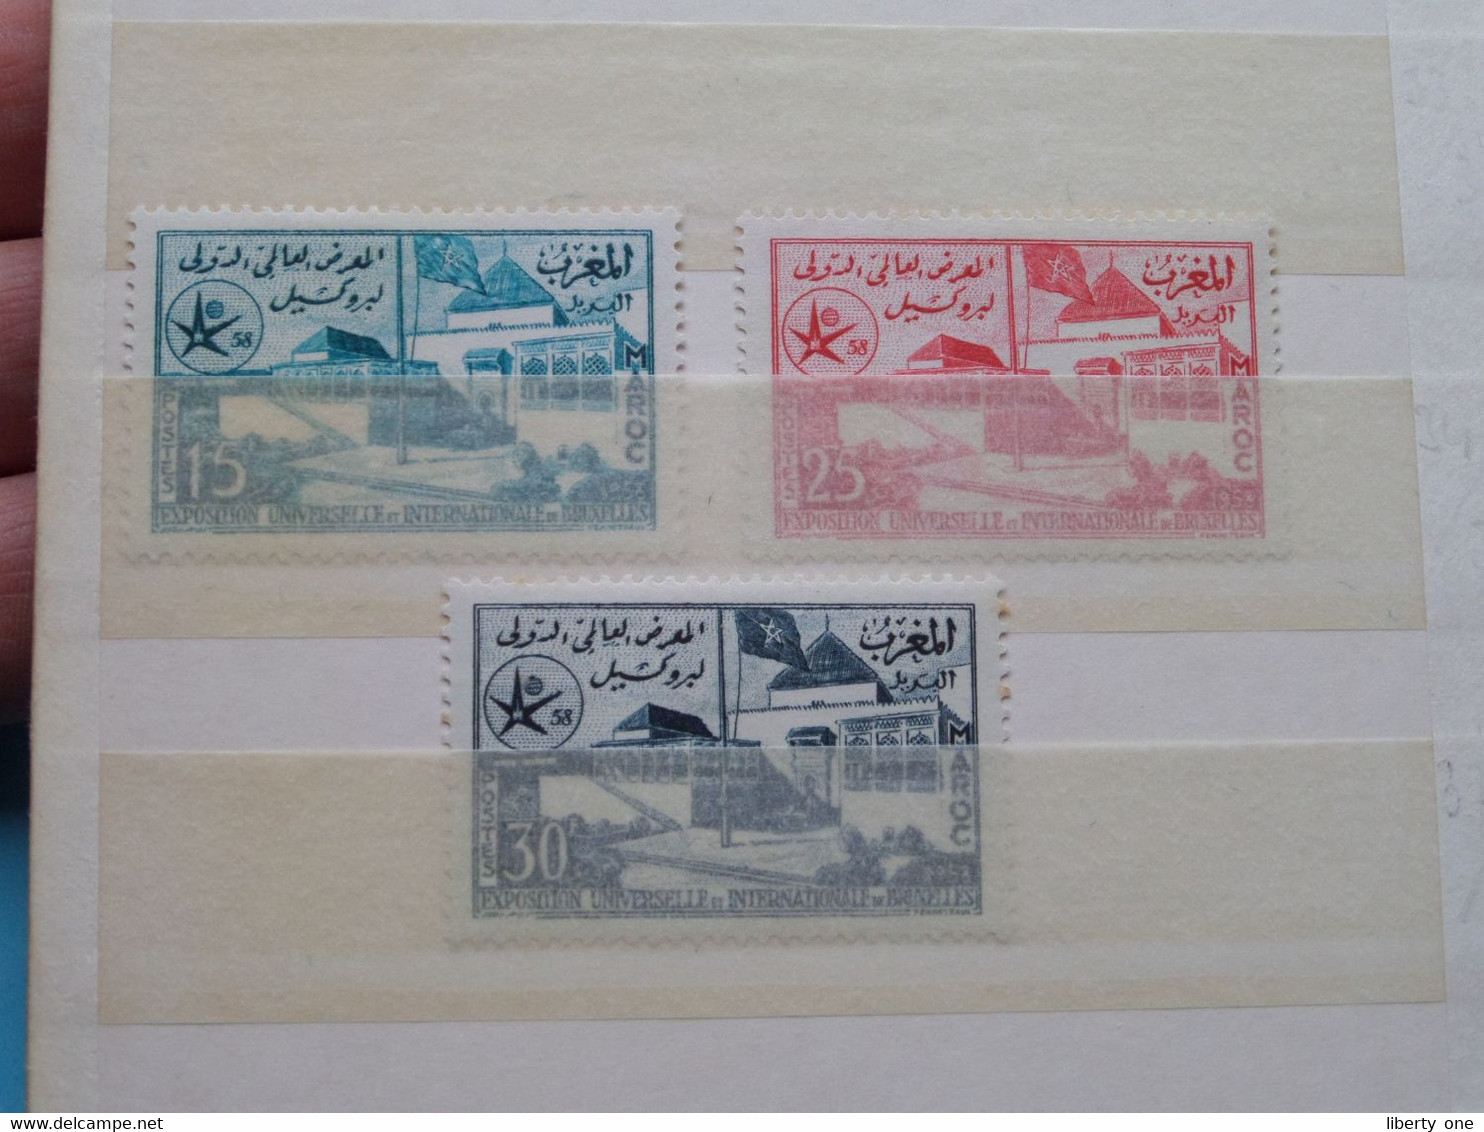 EXPOSITION De BRUXELLES >>> 3 Timbres / Stamps MAROC / Expo Mundial > 1958 Brussels ) See Photo ! - 1958 – Brussels (Belgium)